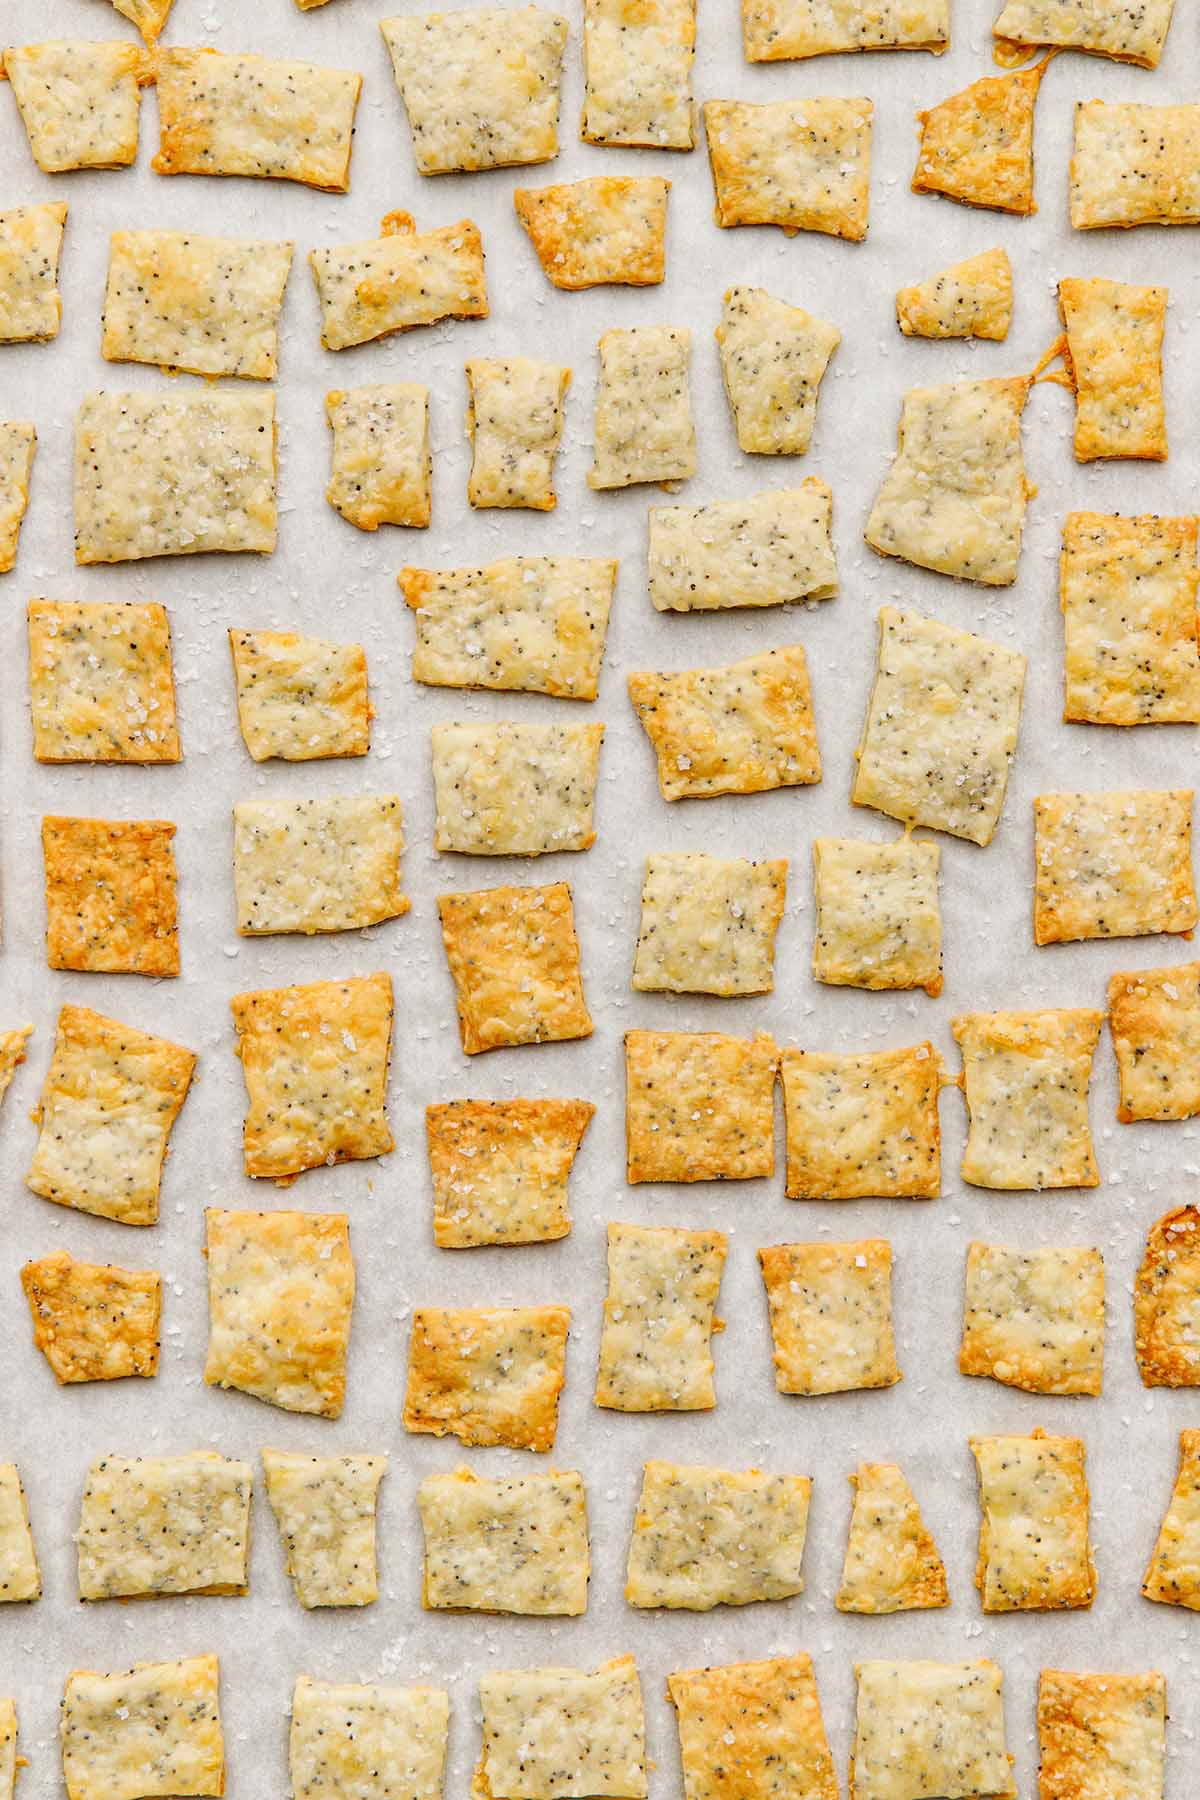 Dozens of small crackers on parchment paper.